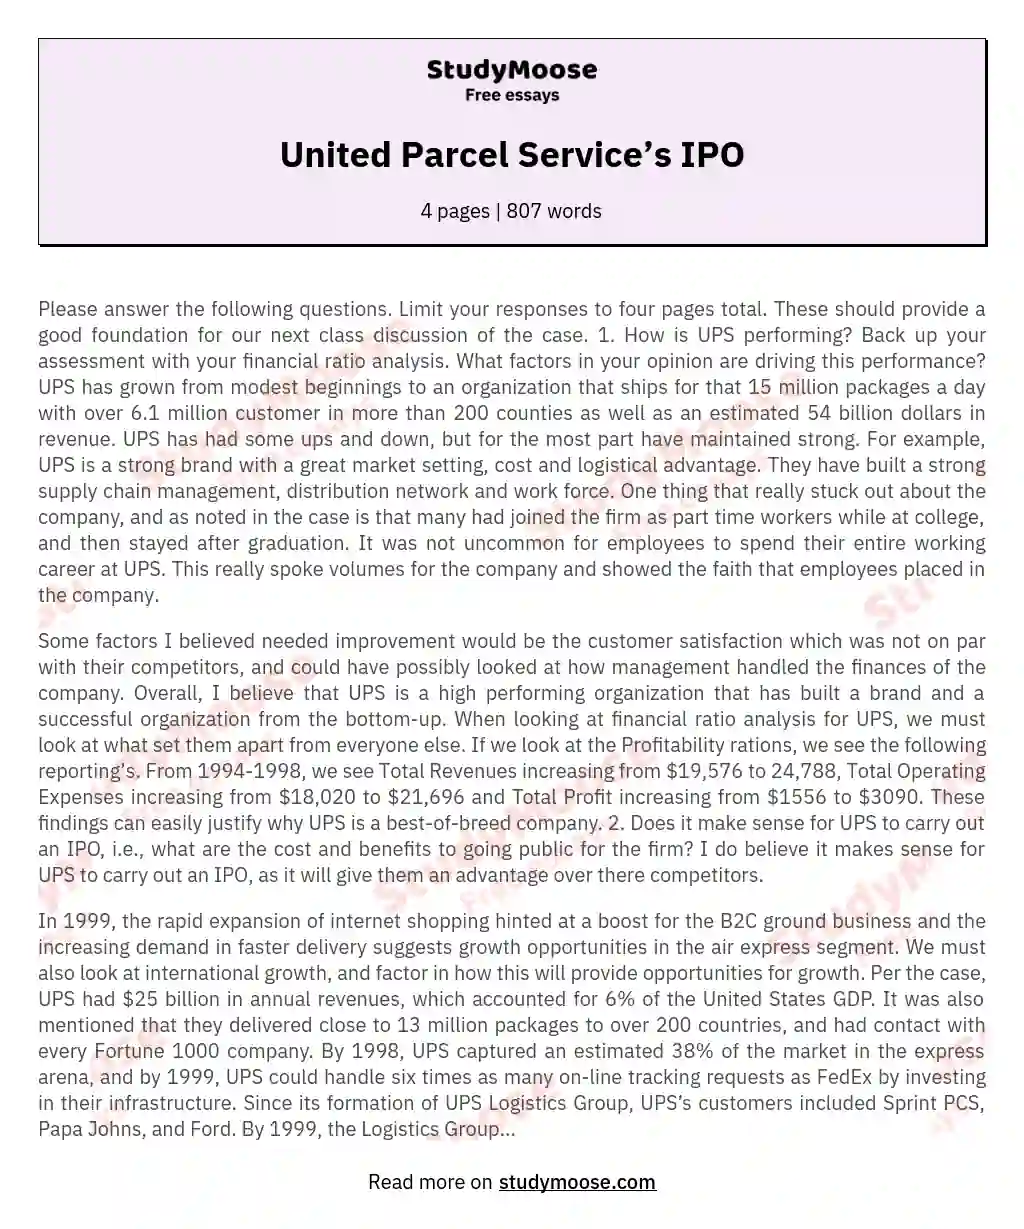 United Parcel Service’s IPO essay